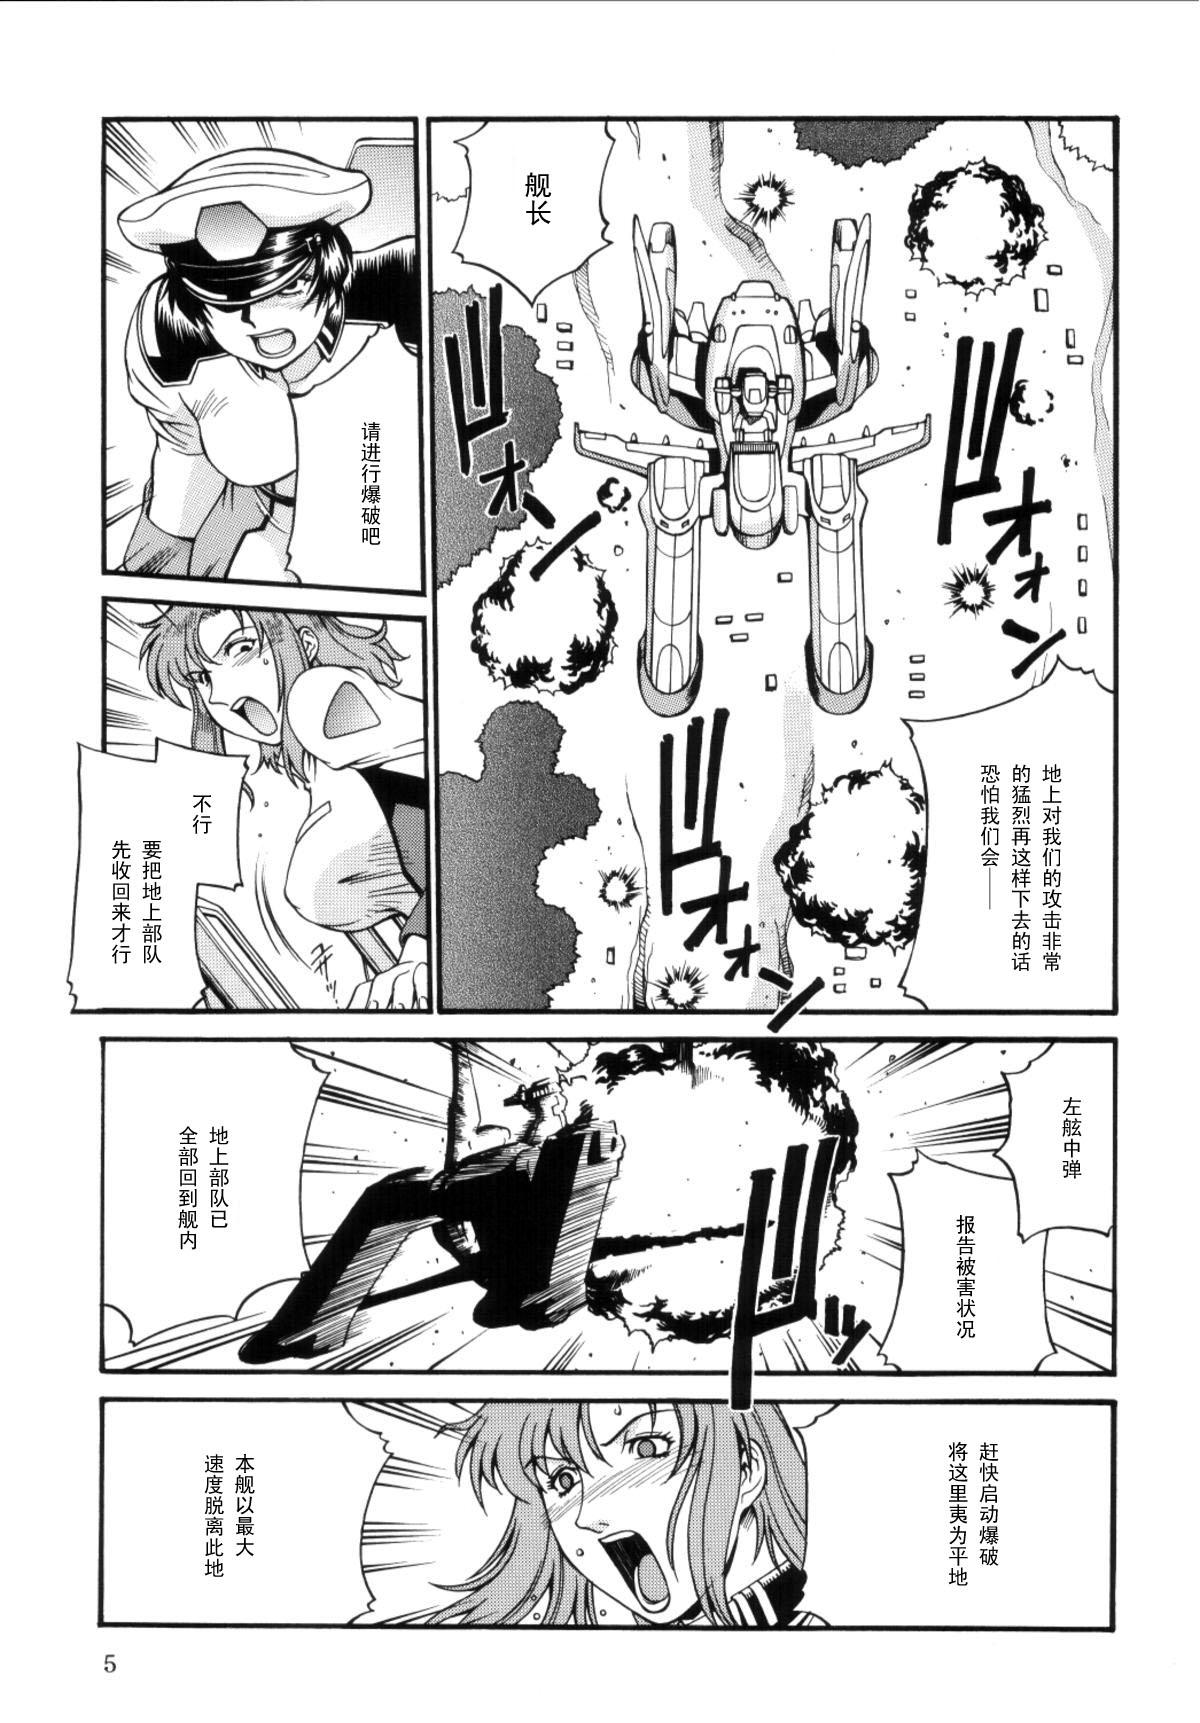 Best Blowjob Ever SEED OUT - Gundam seed Gay 3some - Page 5